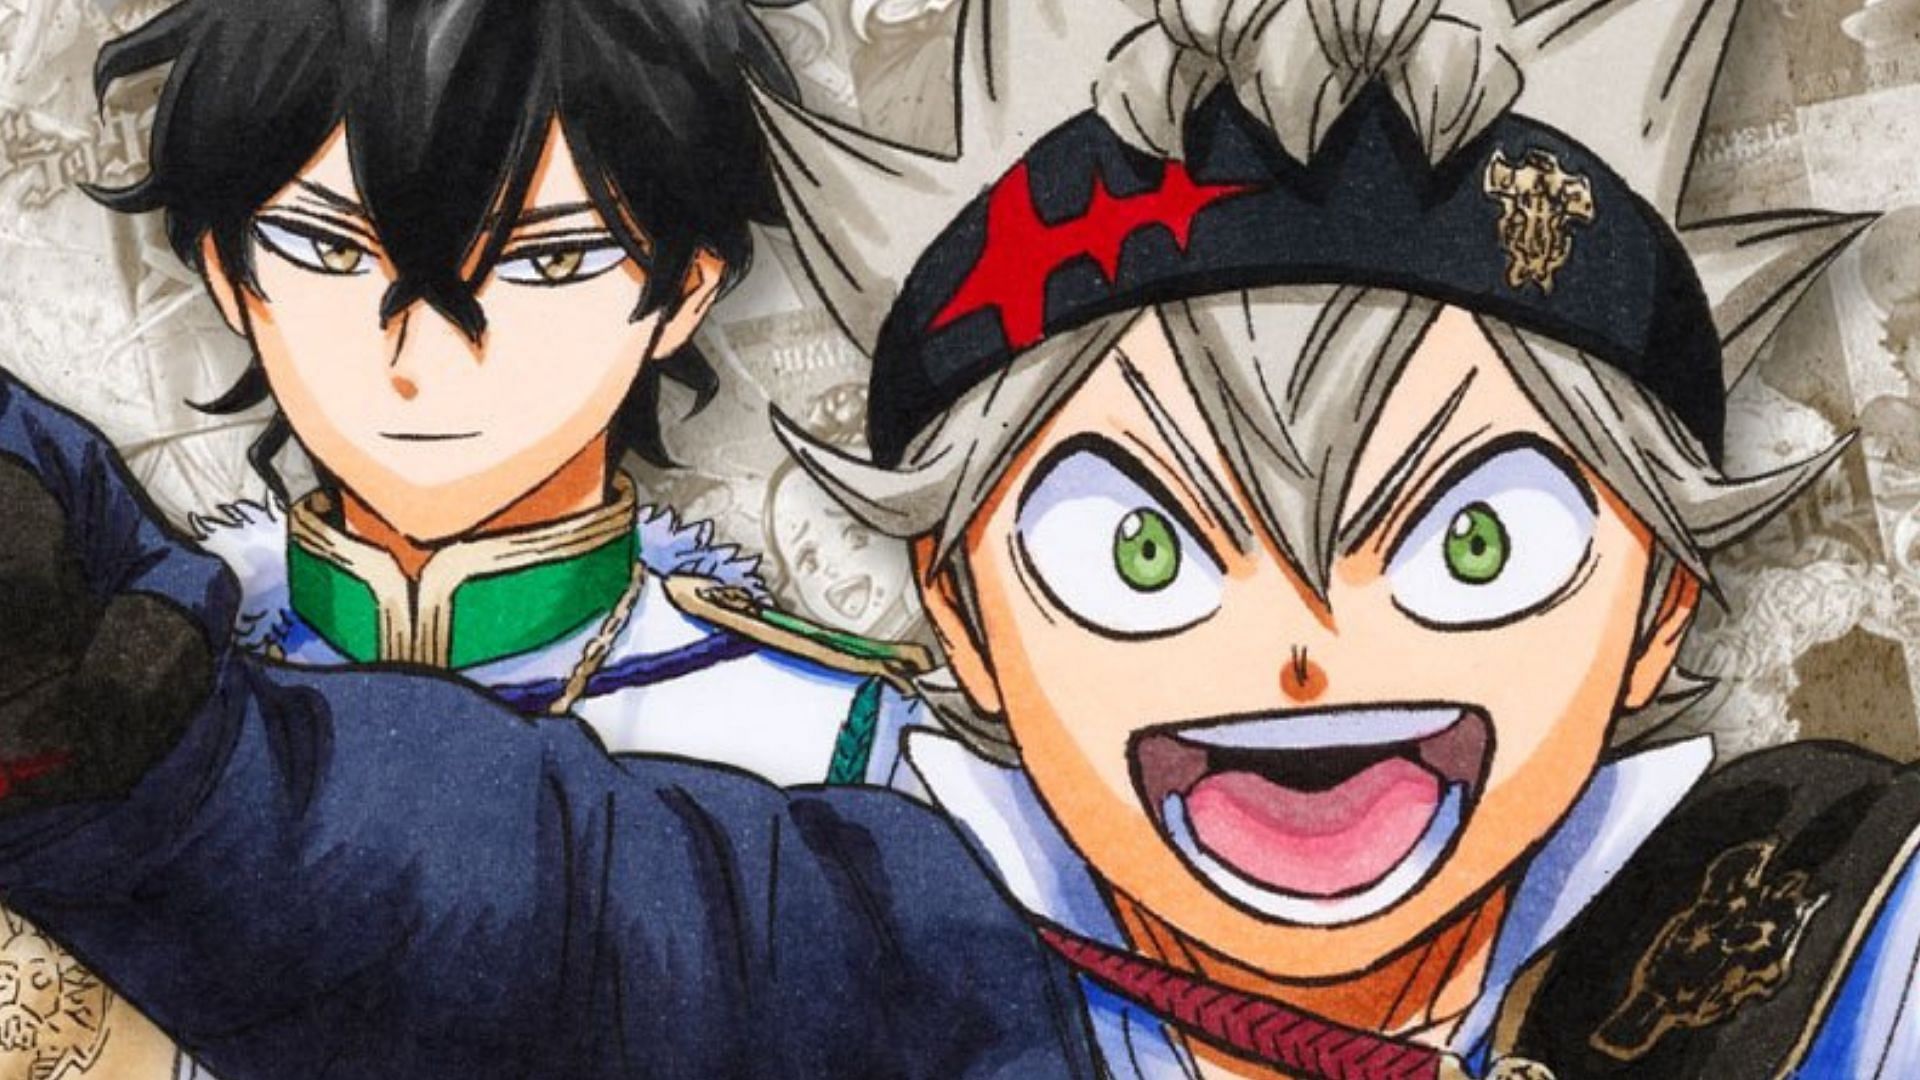 Black Clover chapter 369: Exact release date and time, where to read, and more